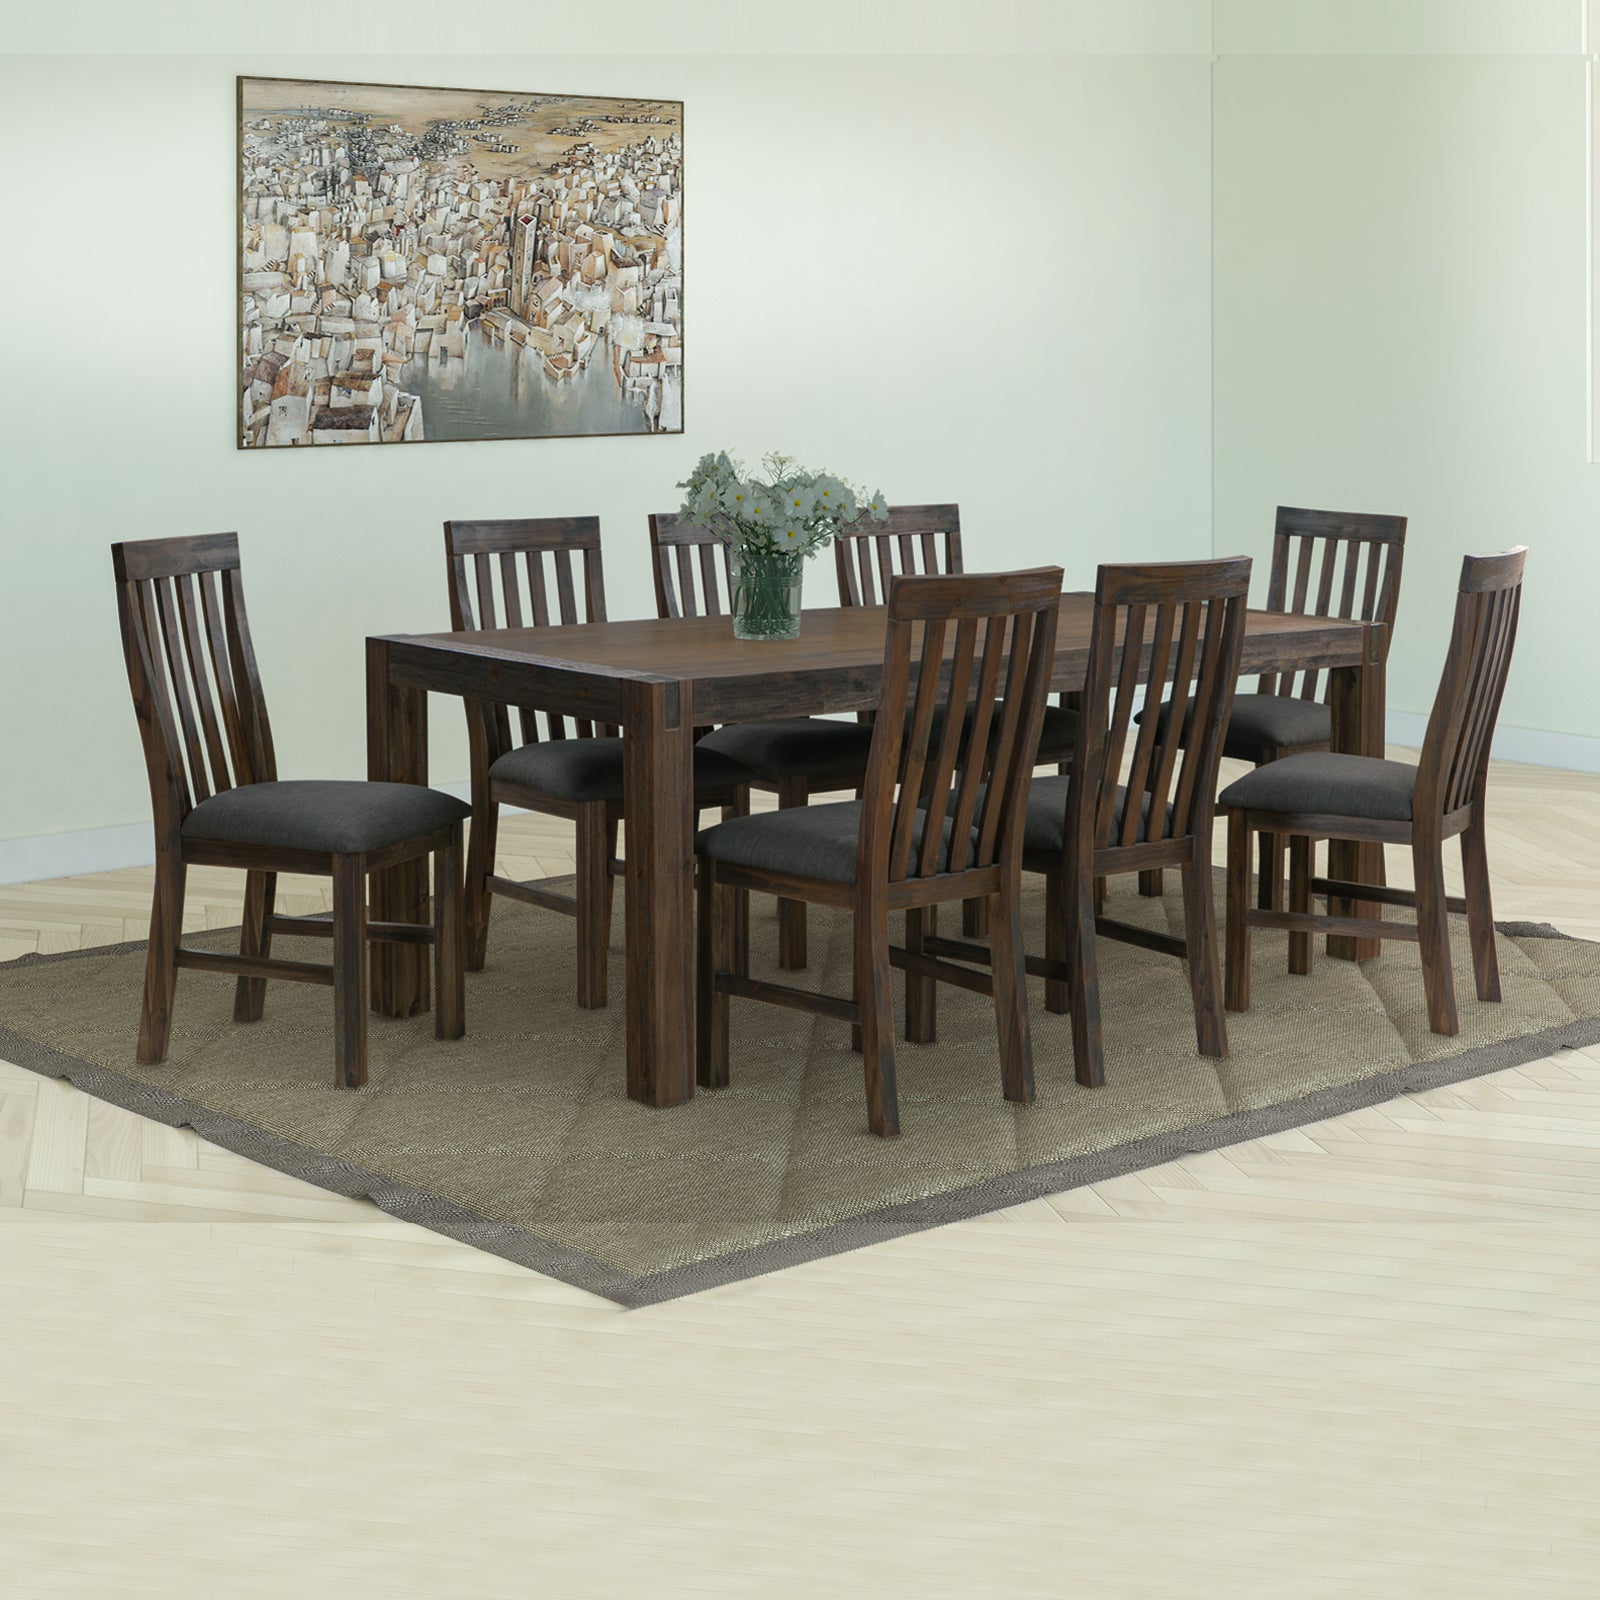 Nowra Solid Acacia Timber Large Size Chocolate Colour Dining Table With 8X Linen Upholstered Chair